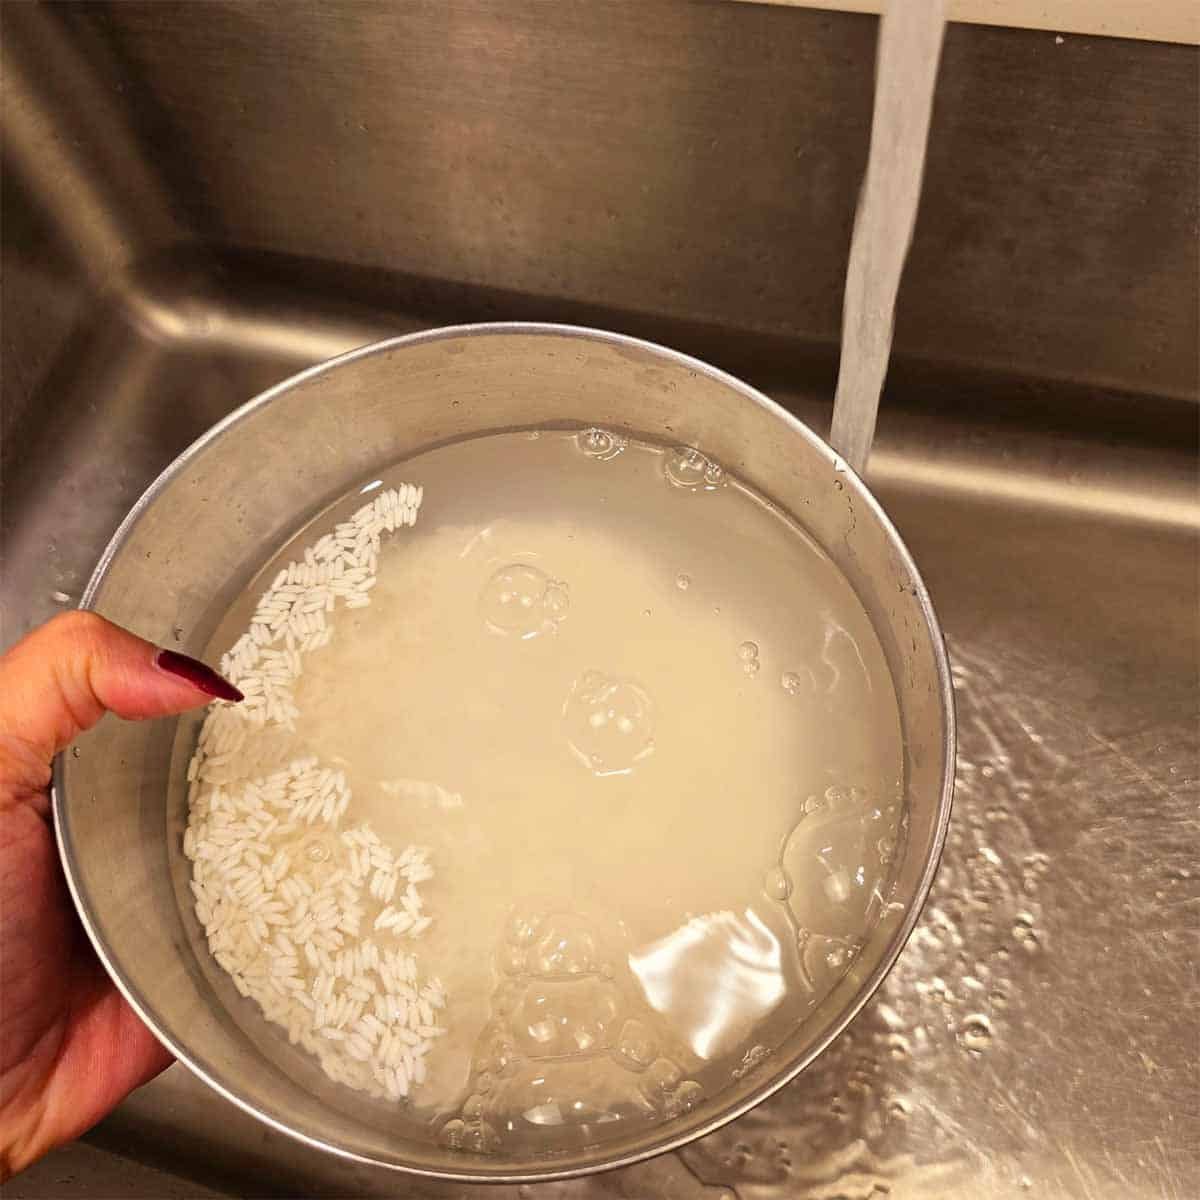 rinsing sweet rice in a bowl under running water, removing excess starch to prepare for cooking."